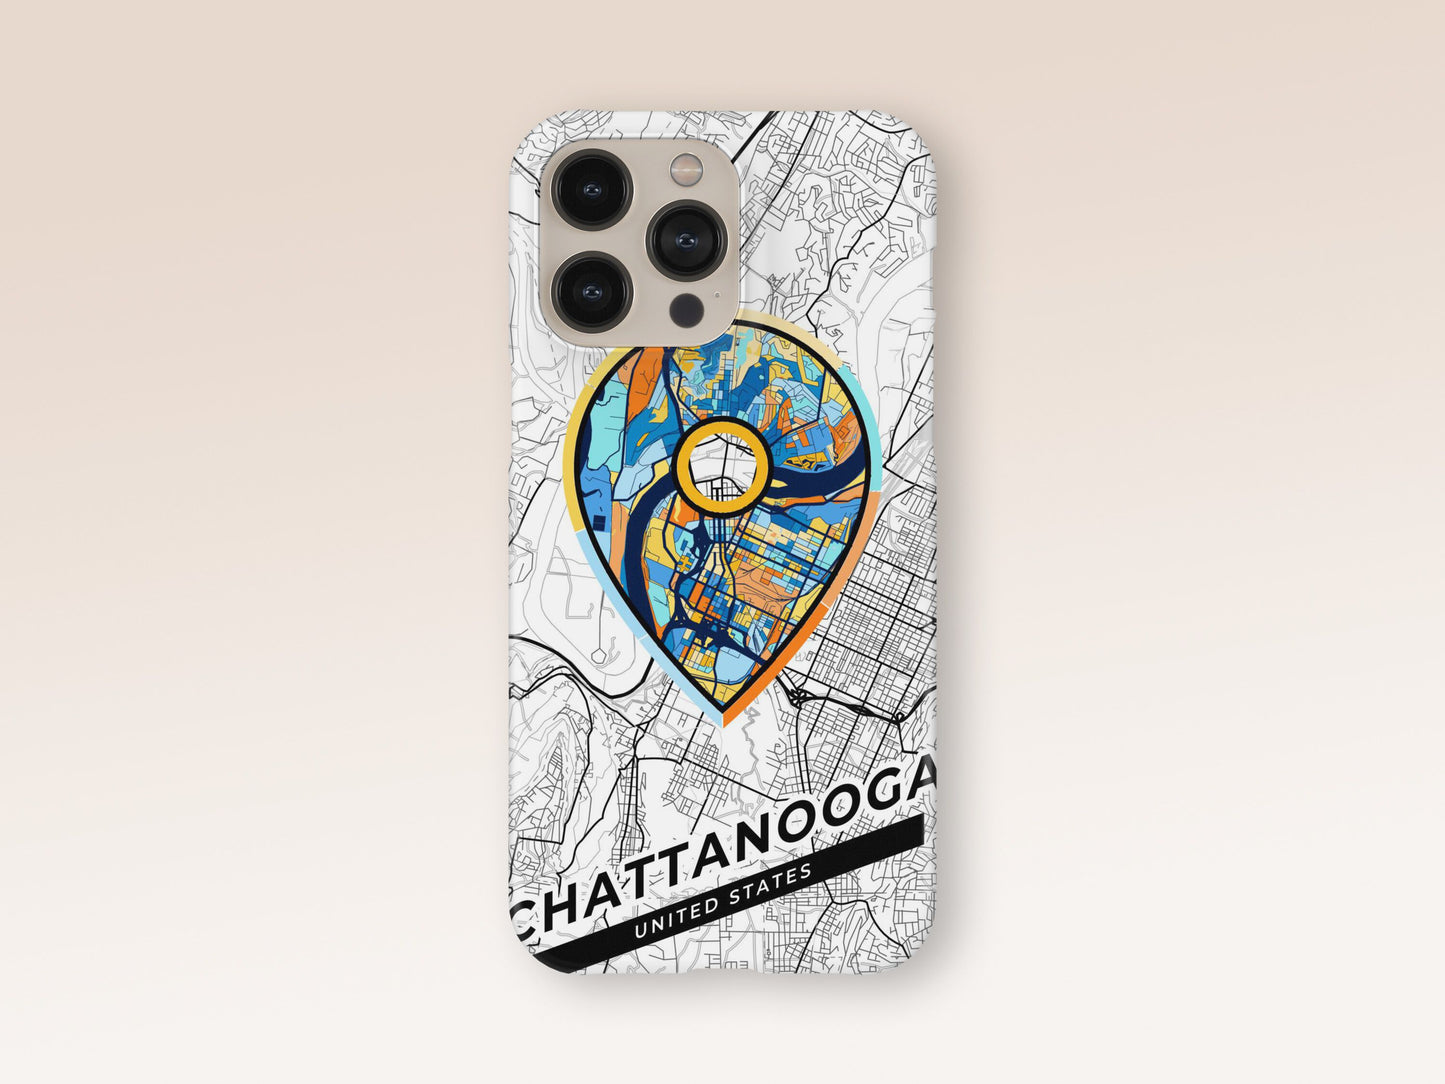 Chattanooga Tennessee slim phone case with colorful icon. Birthday, wedding or housewarming gift. Couple match cases. 1